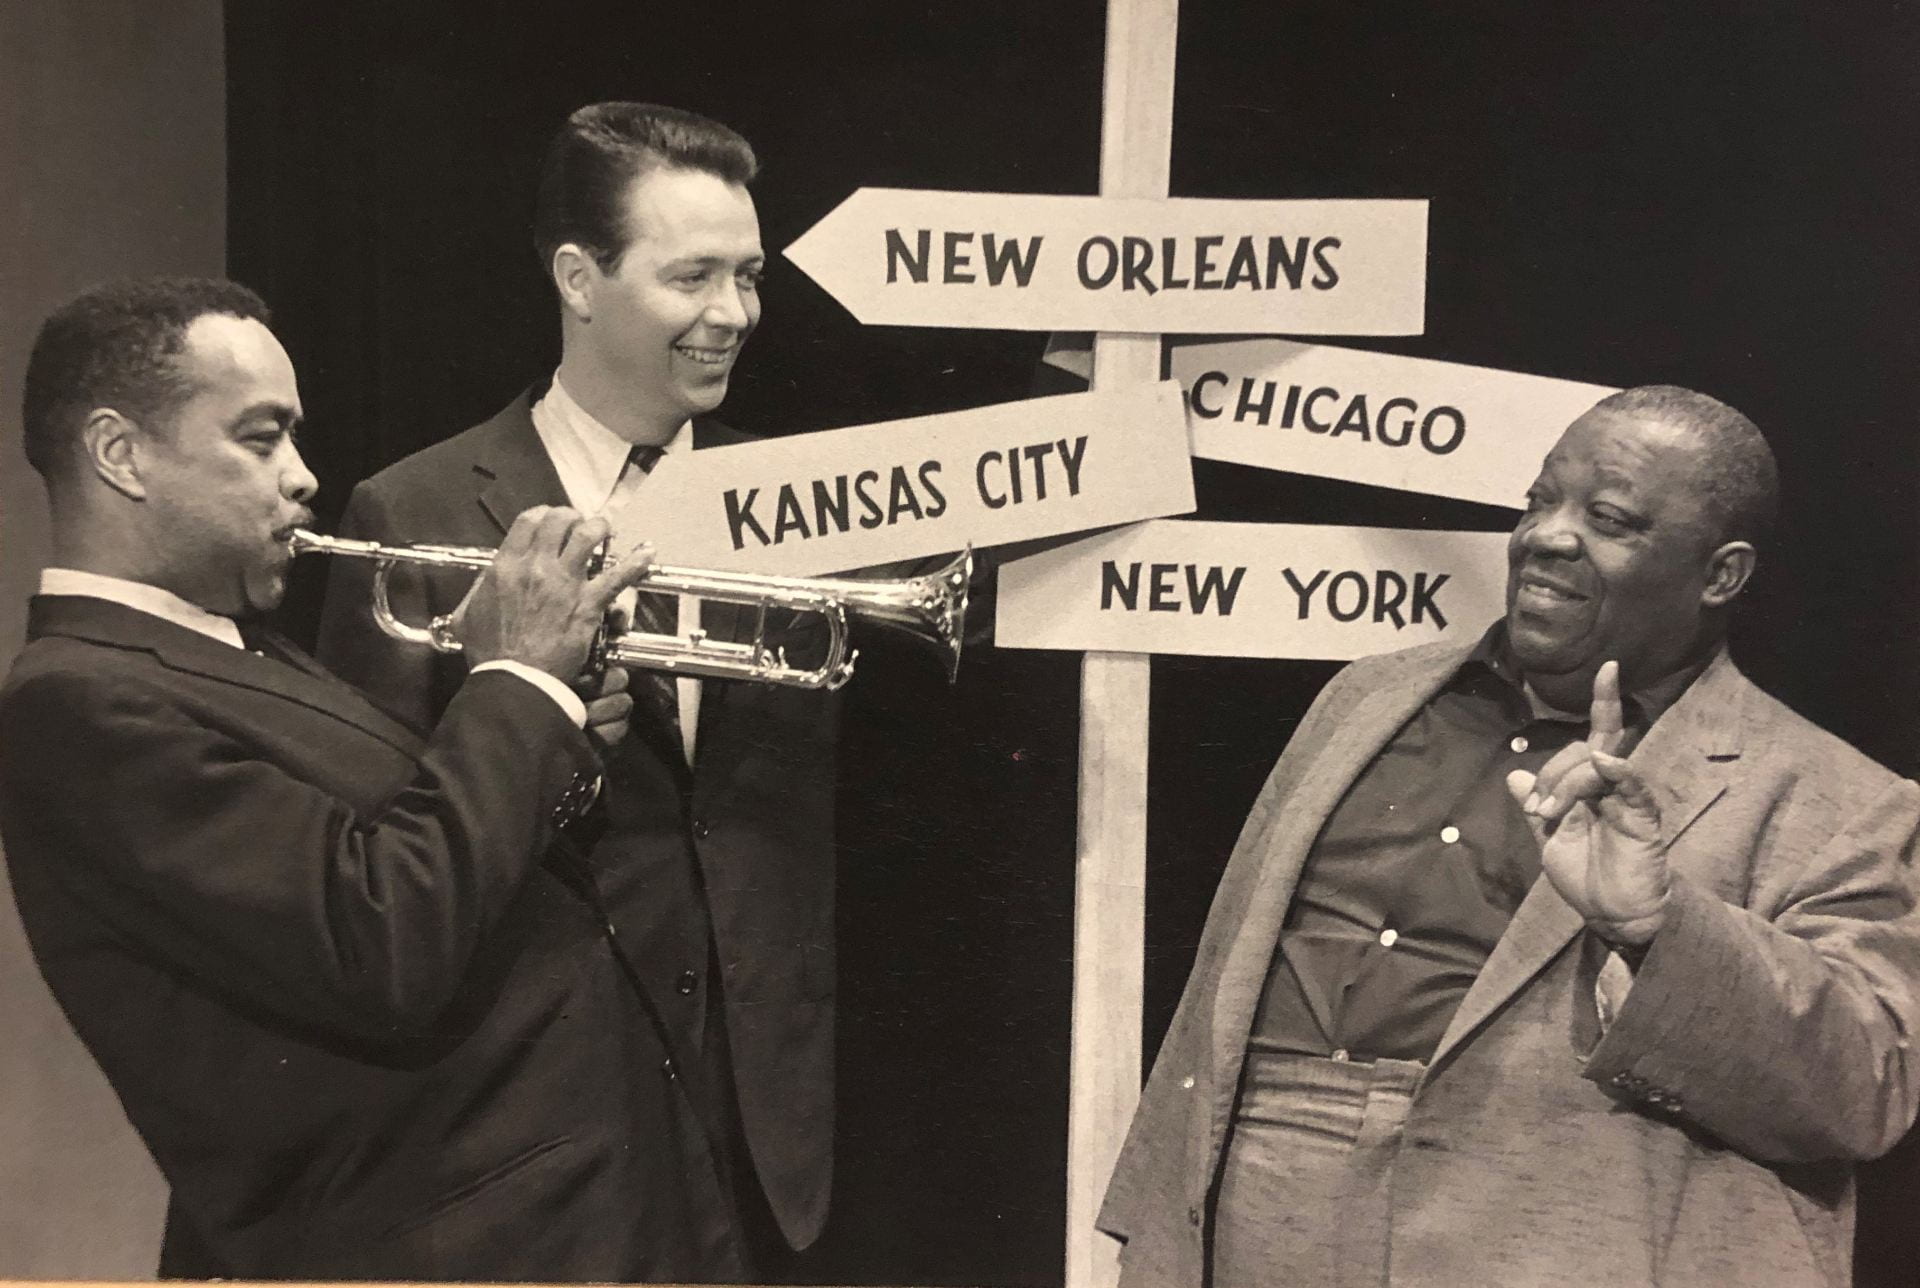 Black and white photograph from 1958 depicting radio announcer James Townsend Fitch standing with jazz musicians Clark Terry and Jimmy Ruching in front if a post with arrowed signs each labeled New Orleans, Kansas City, Chicago, and New York